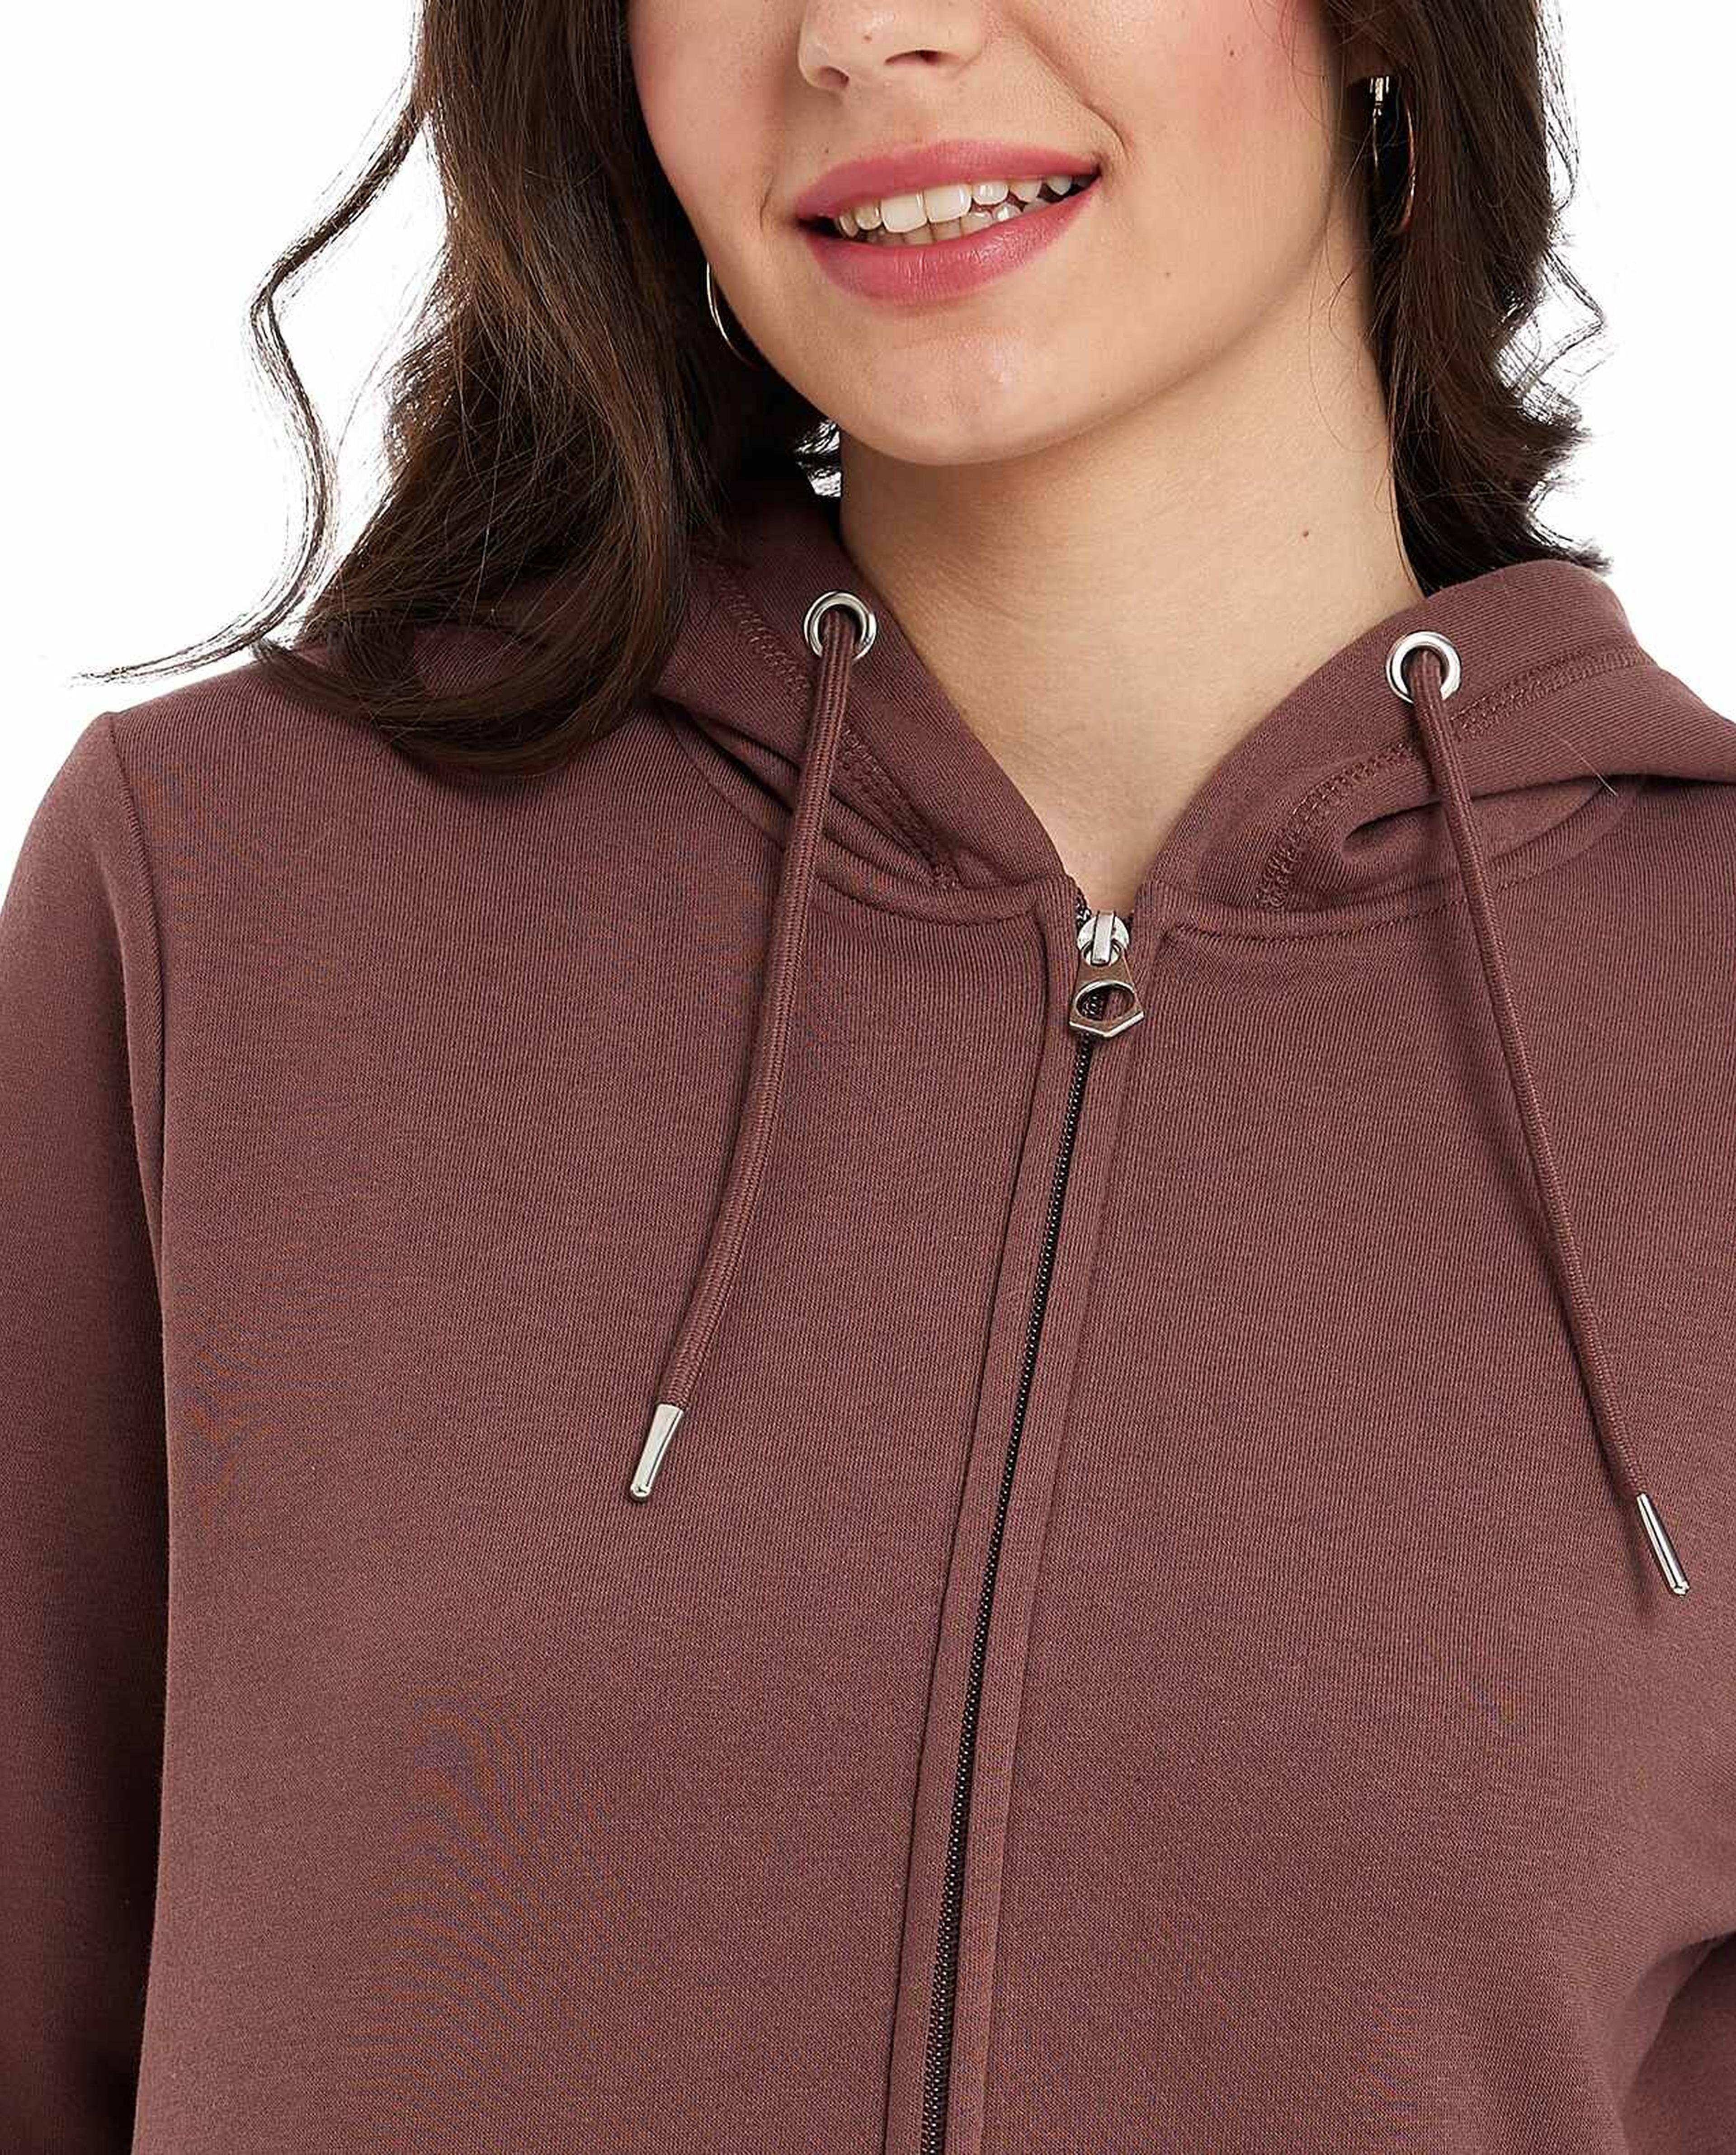 Solid Hooded Jacket with Zipper Closure